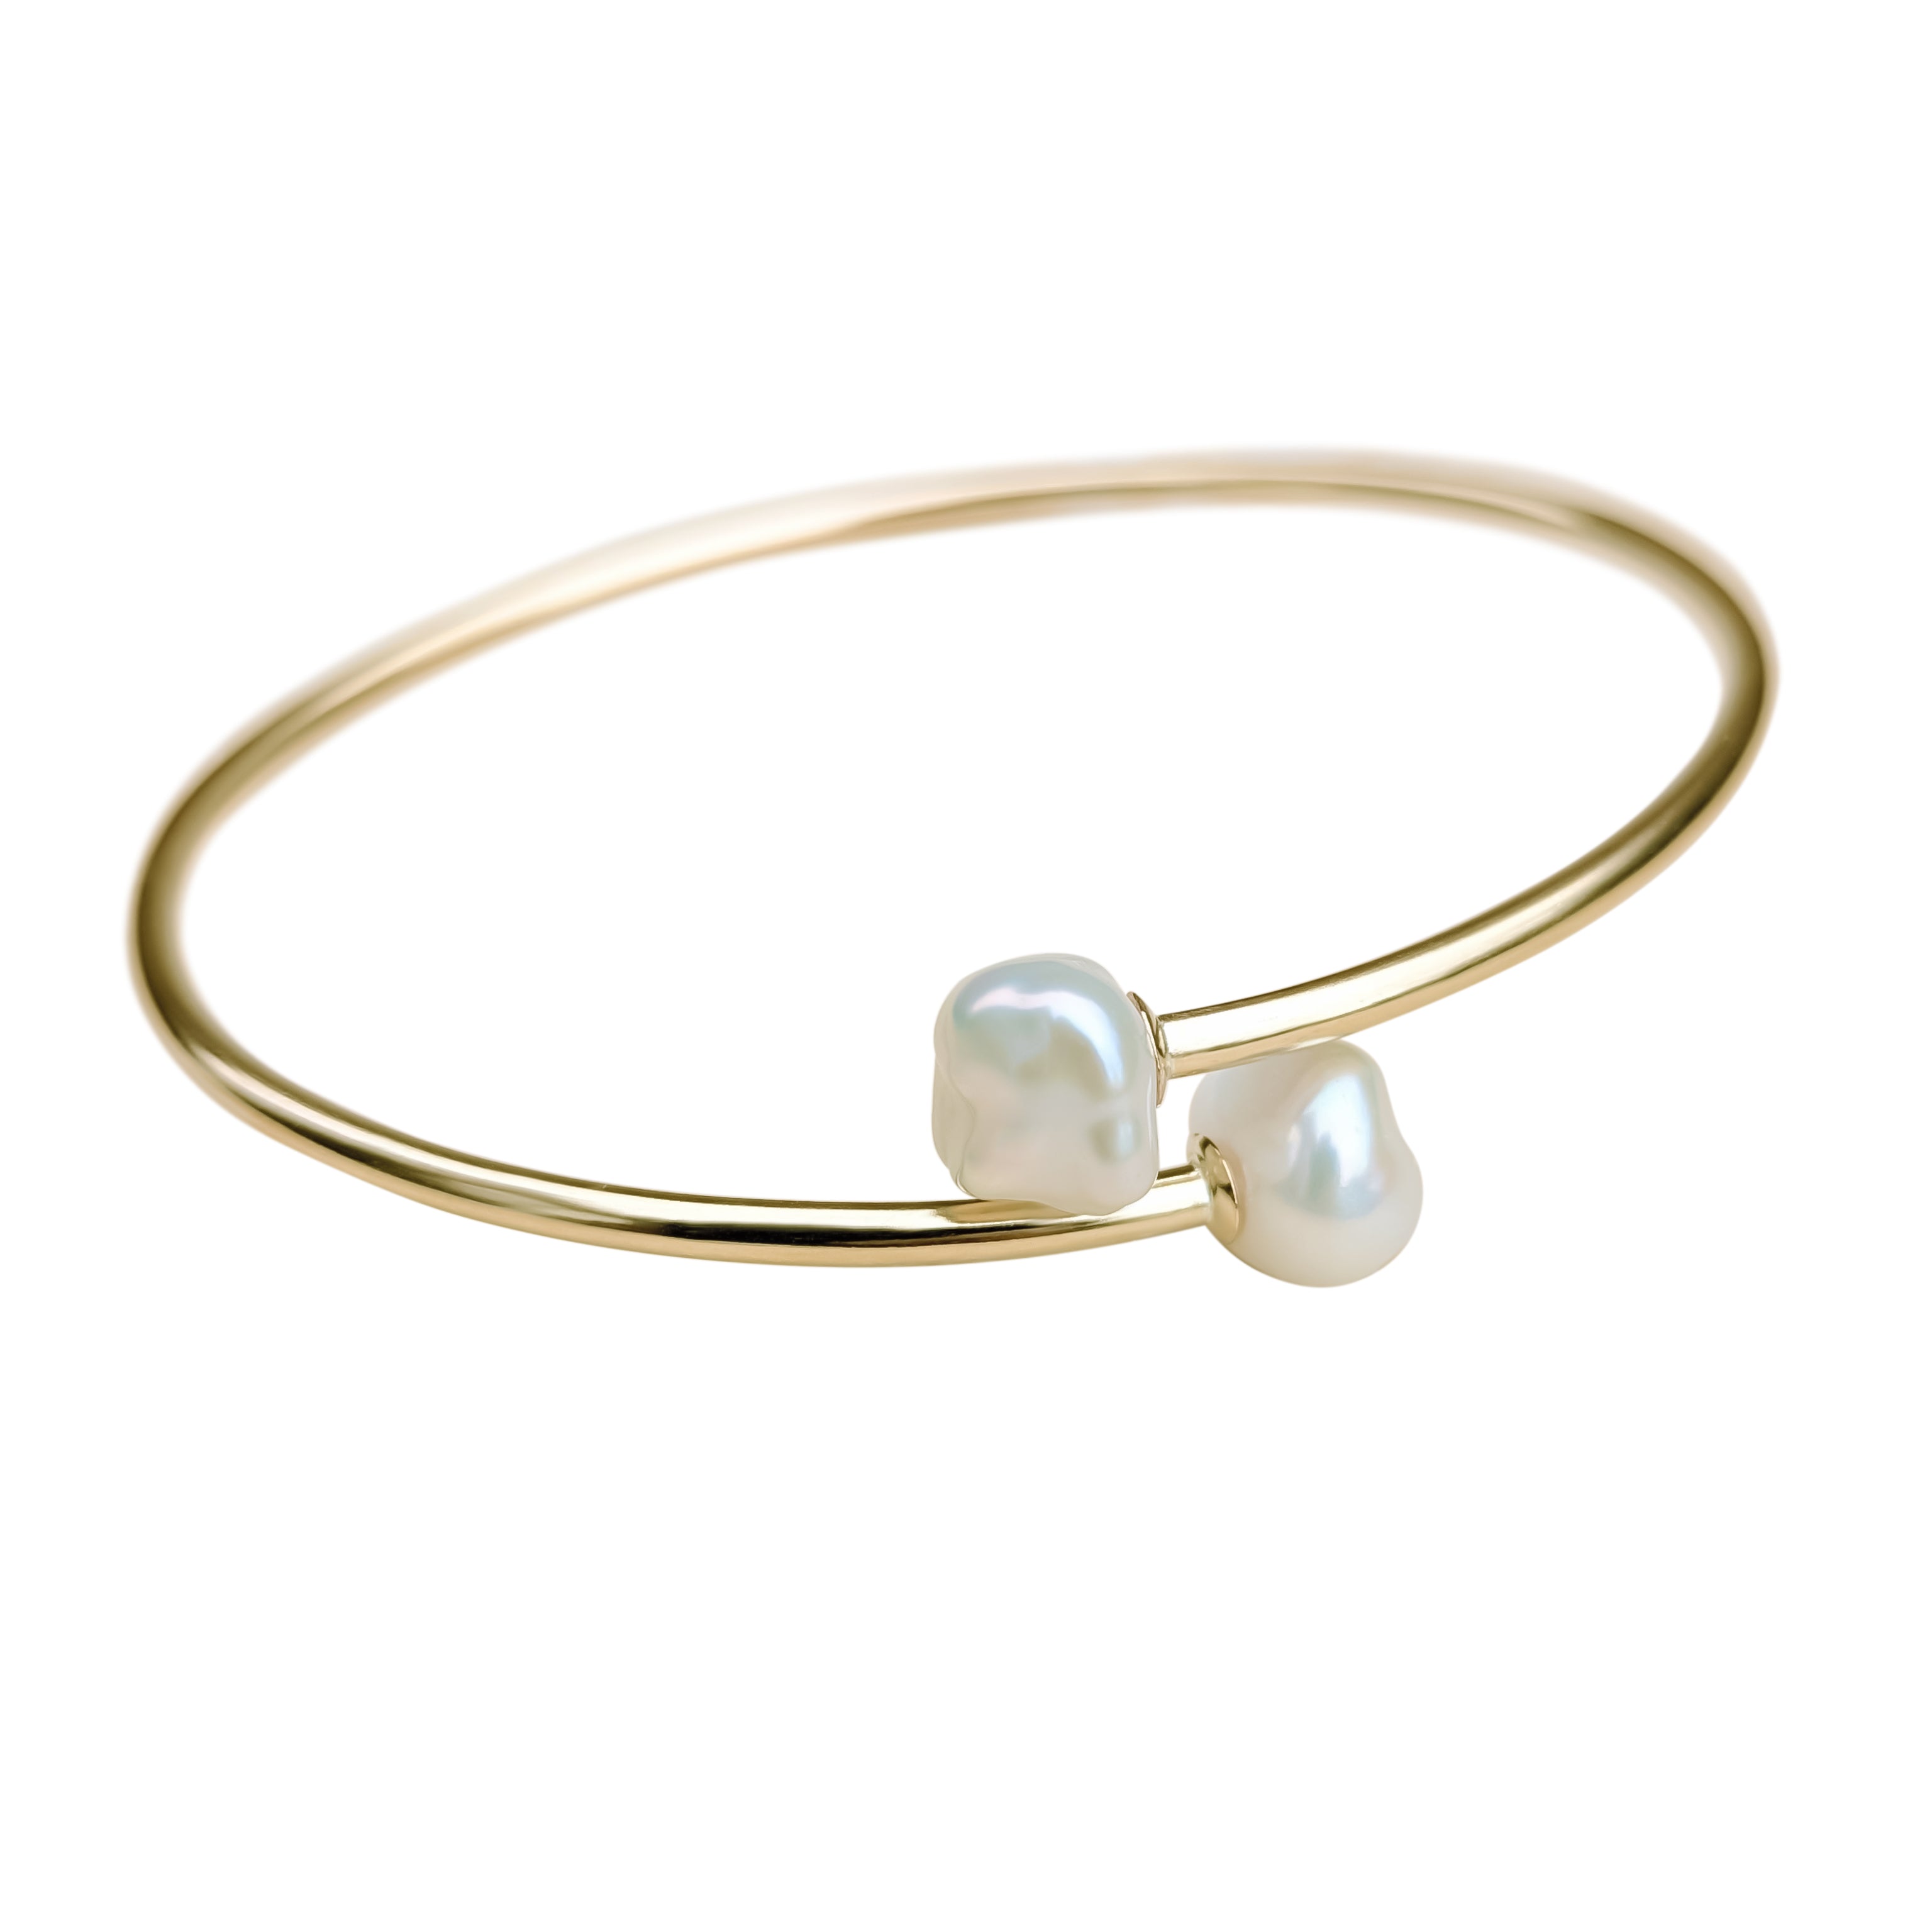 flexible pearl bangle in gold filled on a white background